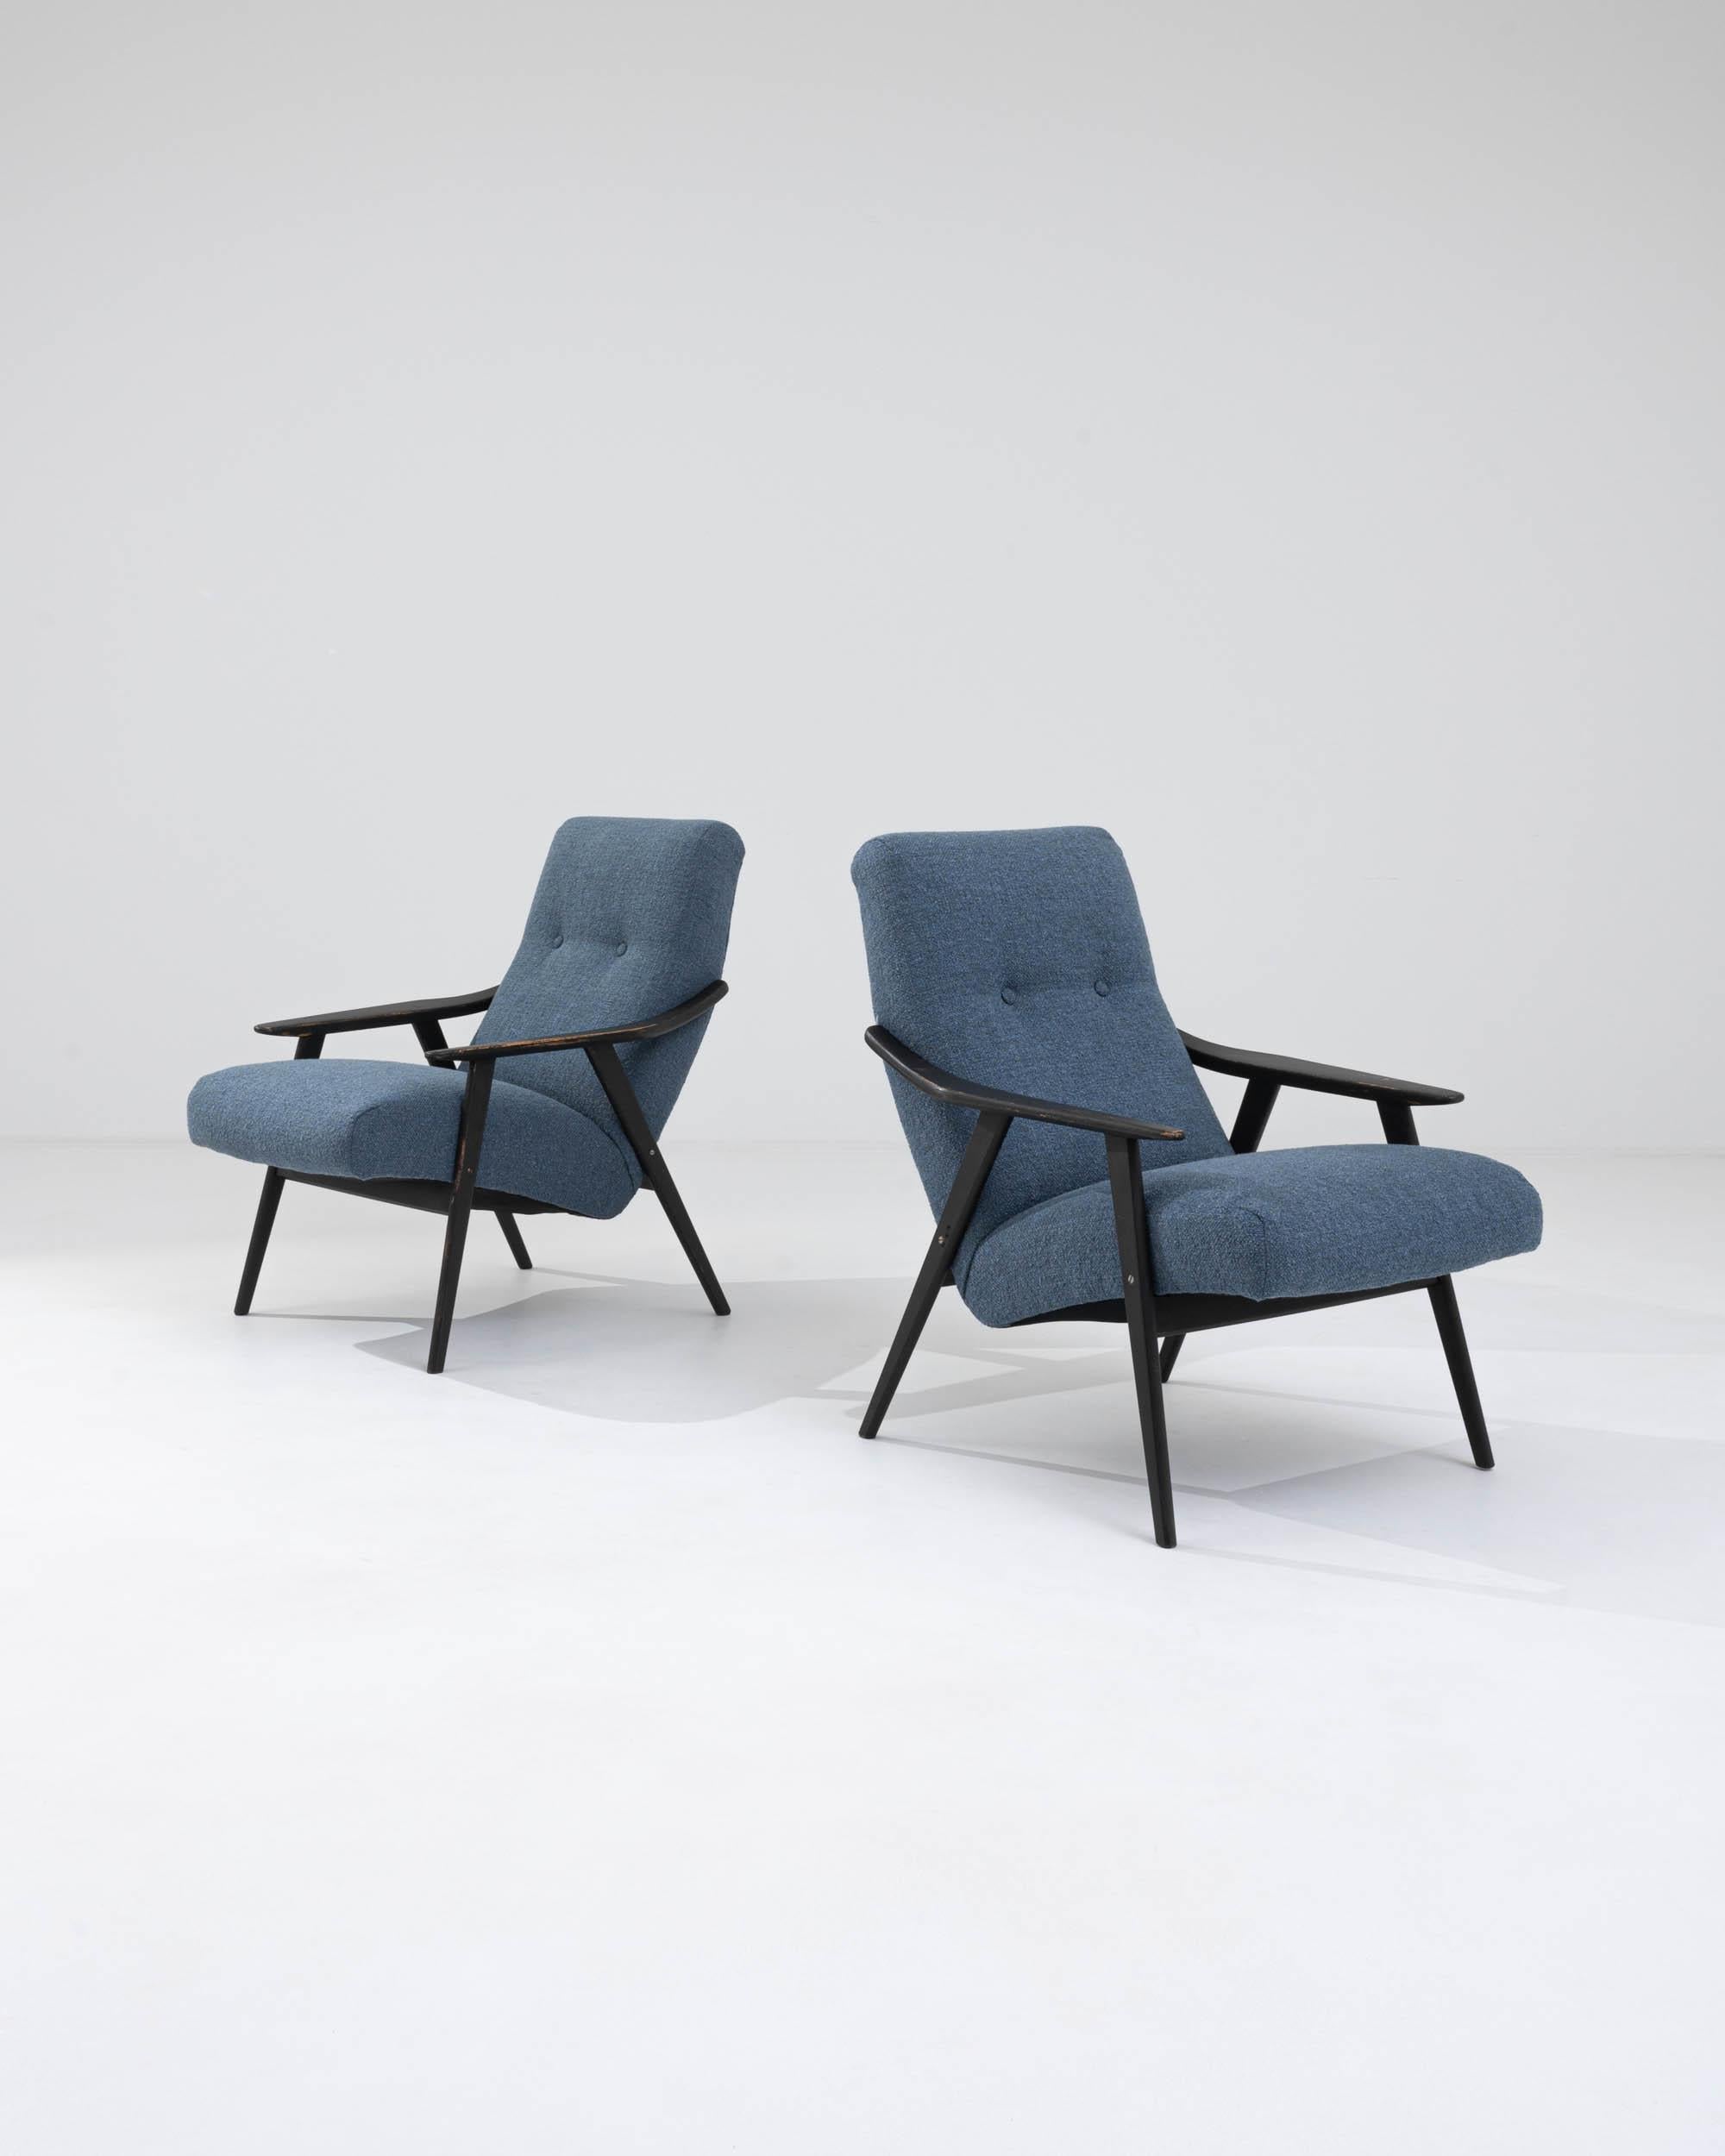 Step back into the charm of the 1960s with this exquisite pair of Czech Wooden Upholstered Armchairs, embodying the era's love for minimalist design and functional comfort. The sleek, angular wooden frames, finished in a deep, rich hue, offer a